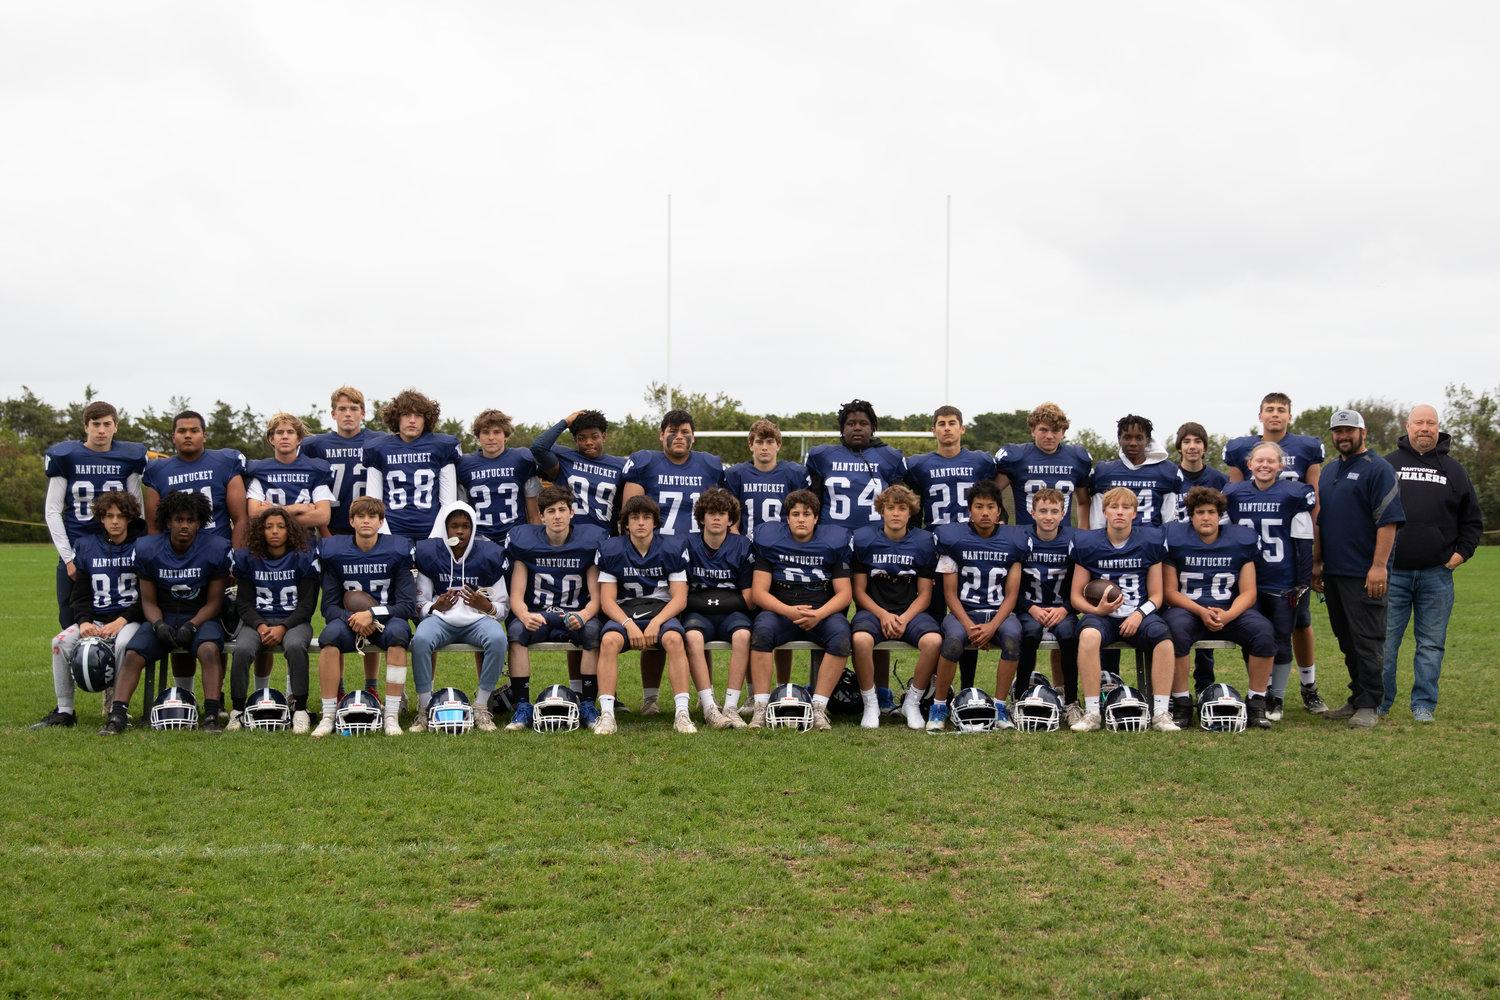 The JV football team, led by coach Jeff Beamish, went 6-2 this season.